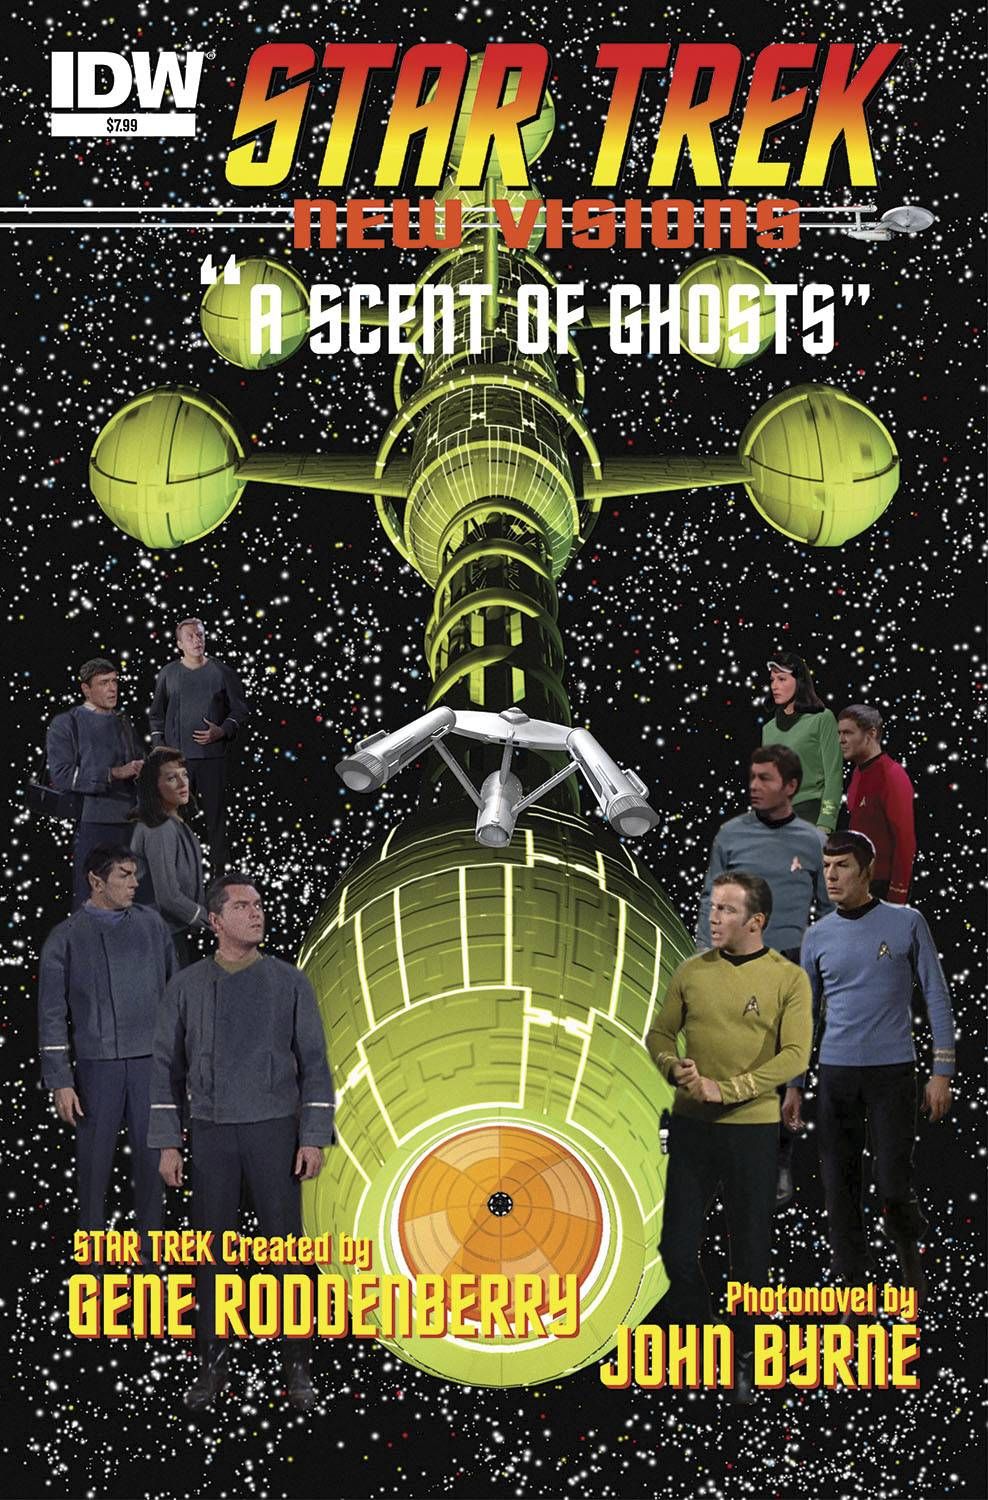 Star Trek: New Visions #5 (A Scent Of Ghosts) Comic